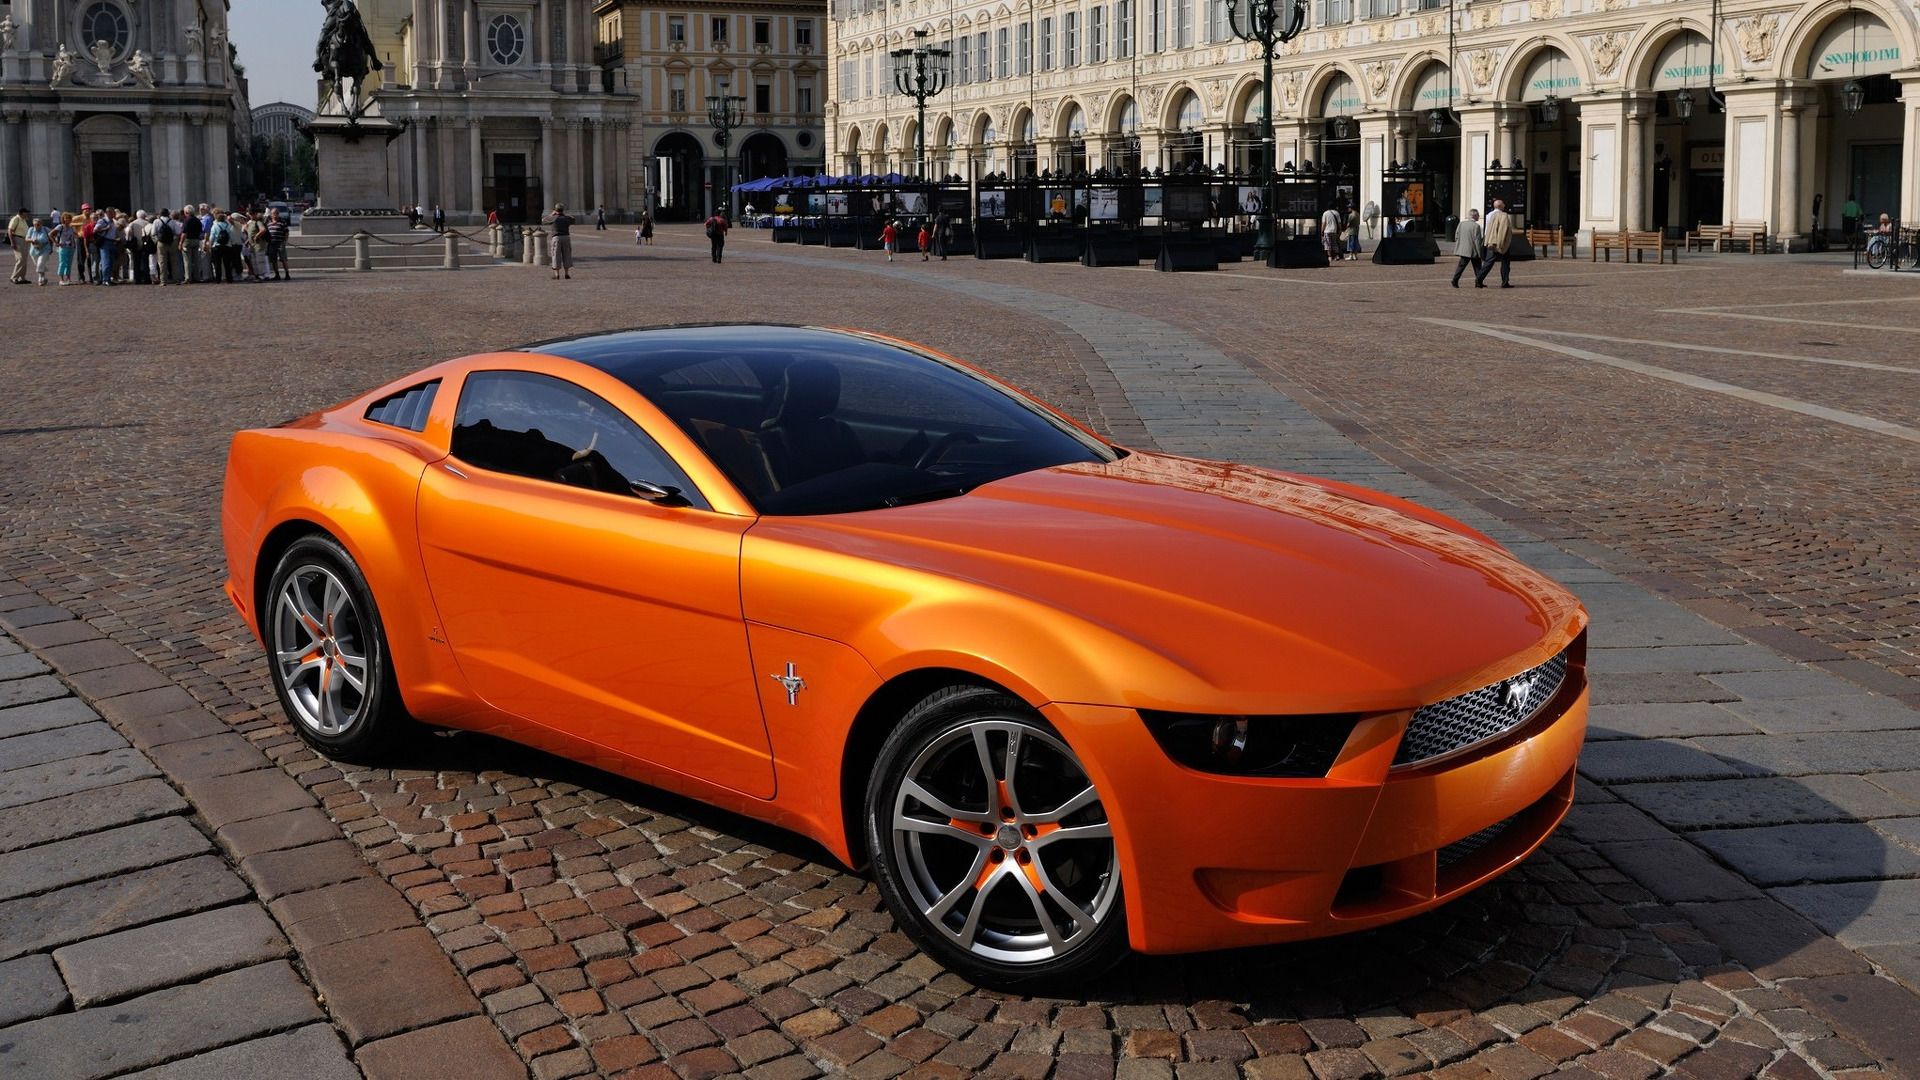 2006 Mustang Giugiaro parked outside